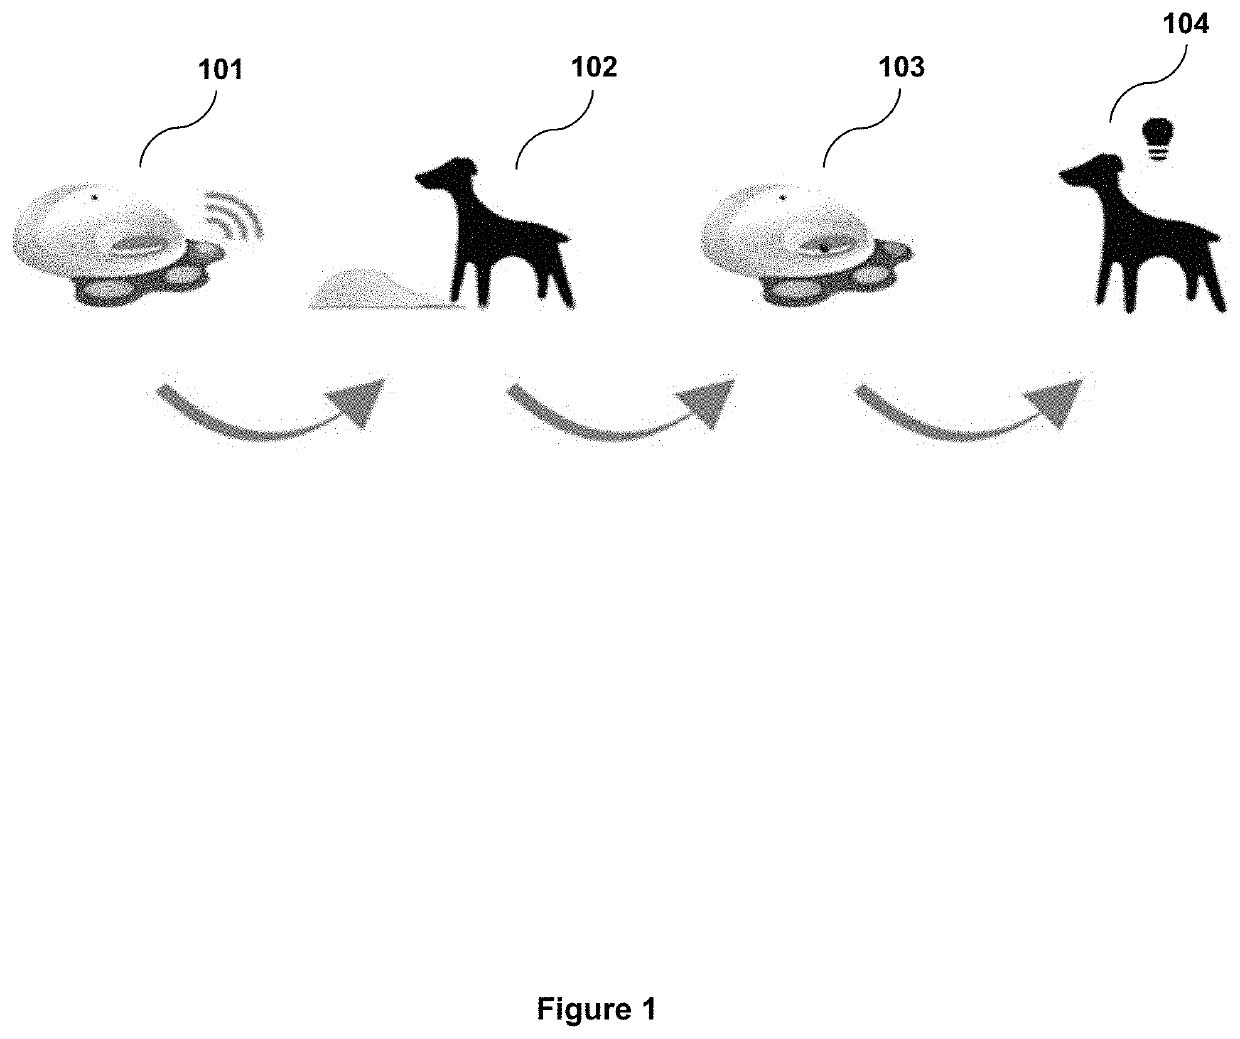 Animal interaction devices, systems and methods